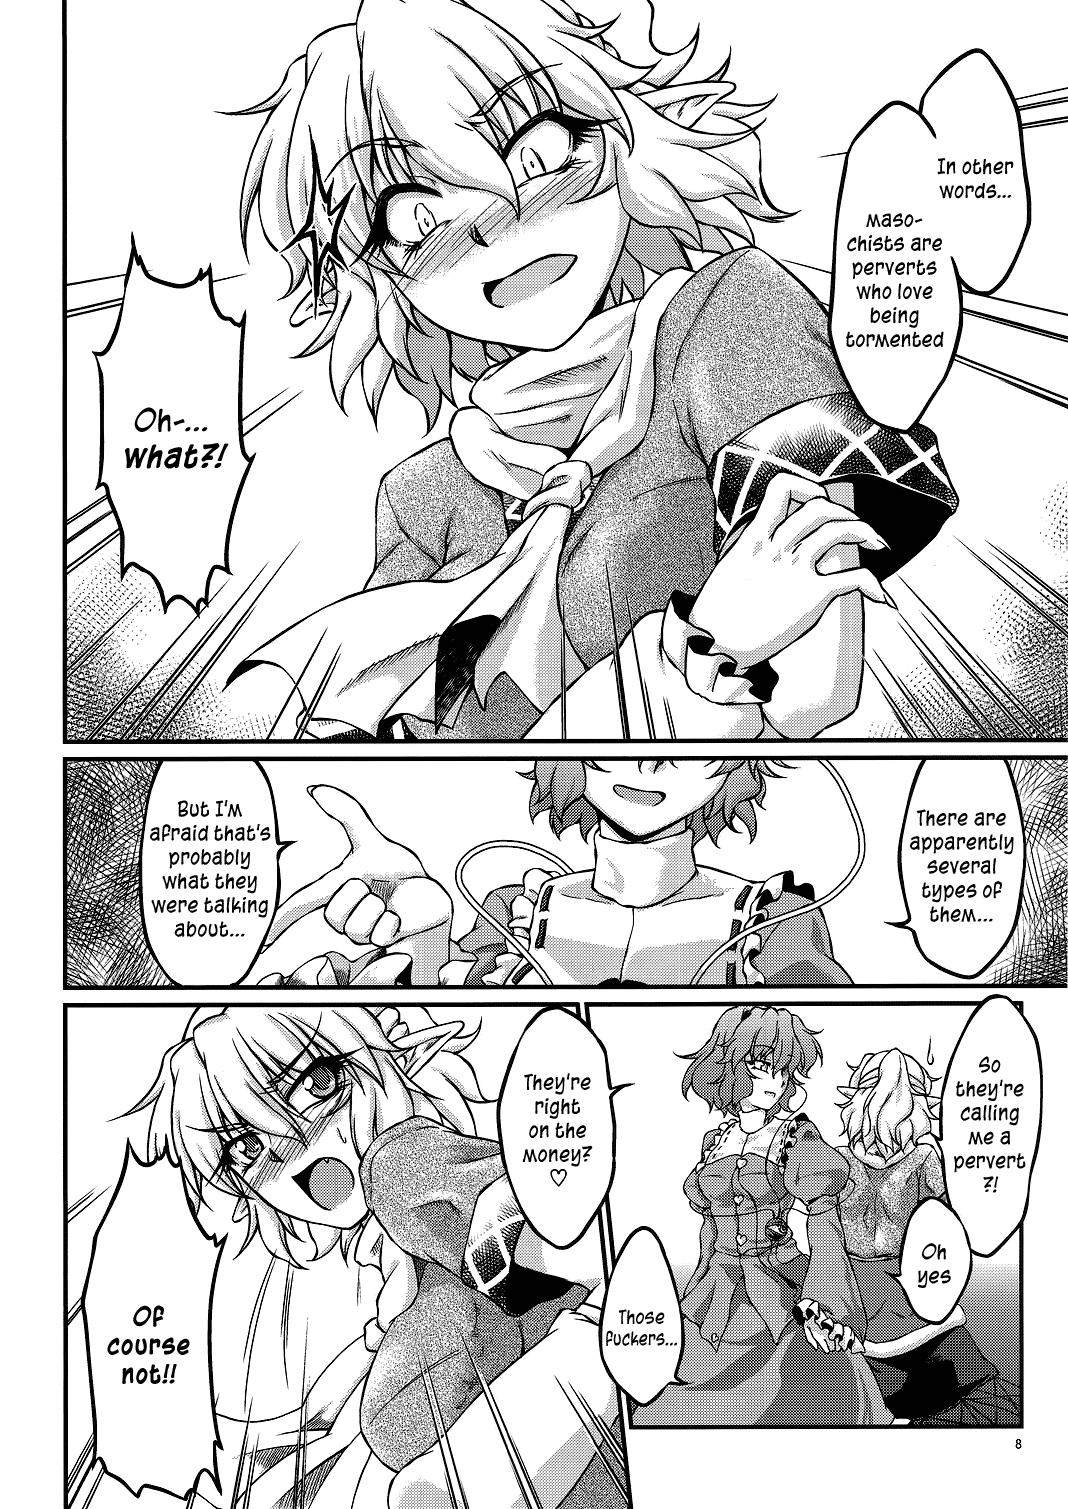 Trio Say the Word - Touhou project Seduction - Page 7